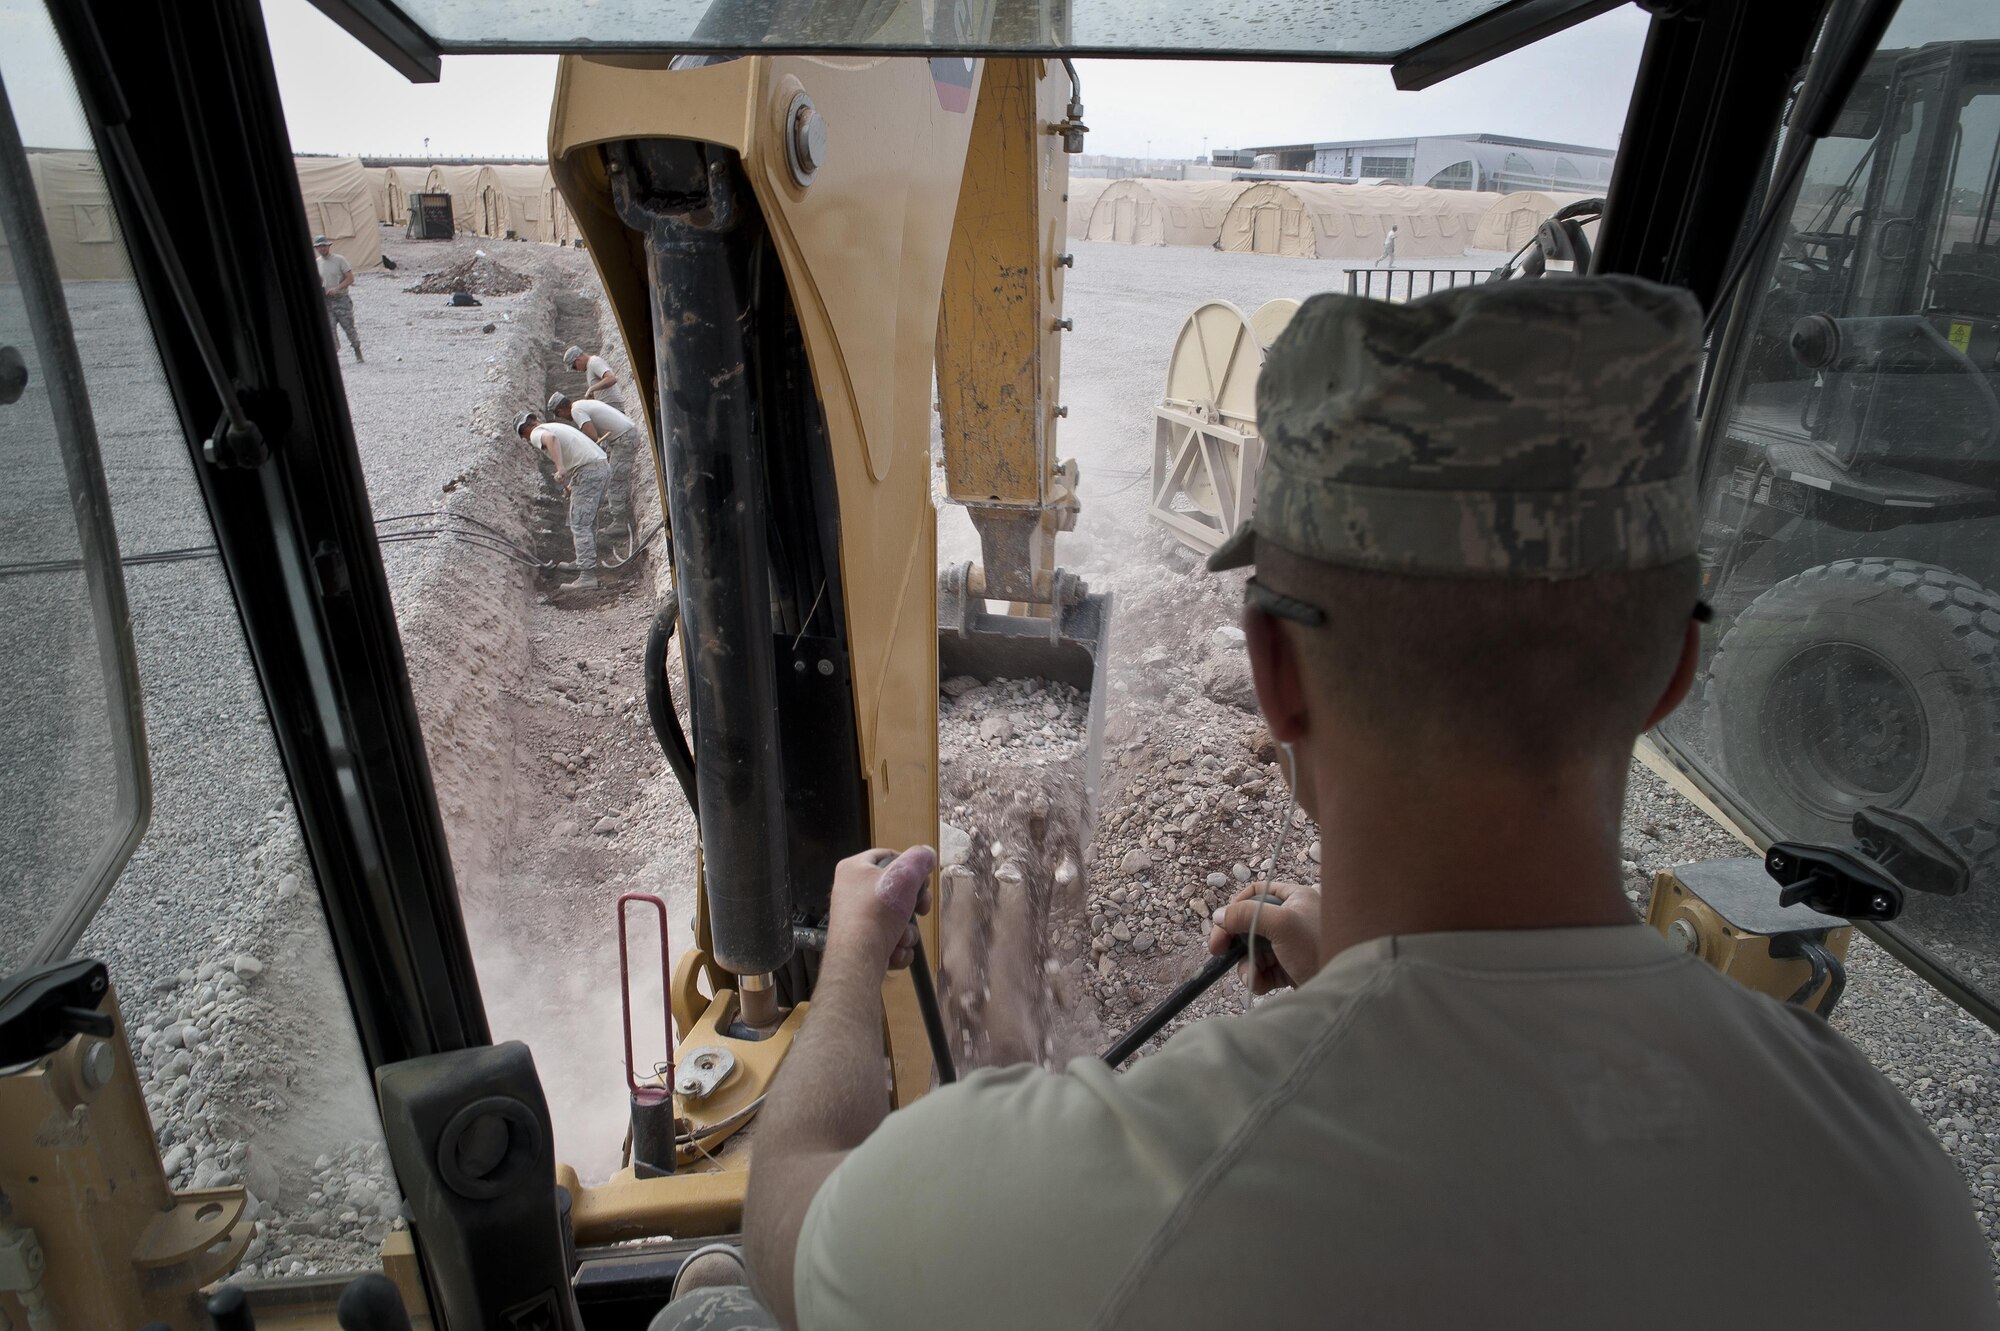 Staff Sgt. Logan Pals, a 435th Construction Training Squadron military construction flight pavement and equipment operator, digs a trench Sept. 22, 2015, in preparation for personnel recovery operations at Diyarbakir Air Base, Turkey. The 435th CTS falls under the 435th Contingency Response Group at Ramstein Air Base, Germany. The group provides a cross-functional, rapidly deployable airborne force designed to assess and open air bases and perform initial airfield operations enabling rapid standup of combat operations anywhere in the U.S. European Command and U.S. Africa Command’s area of responsibilities. (U.S. Air Force photo/Airman Cory W. Bush)